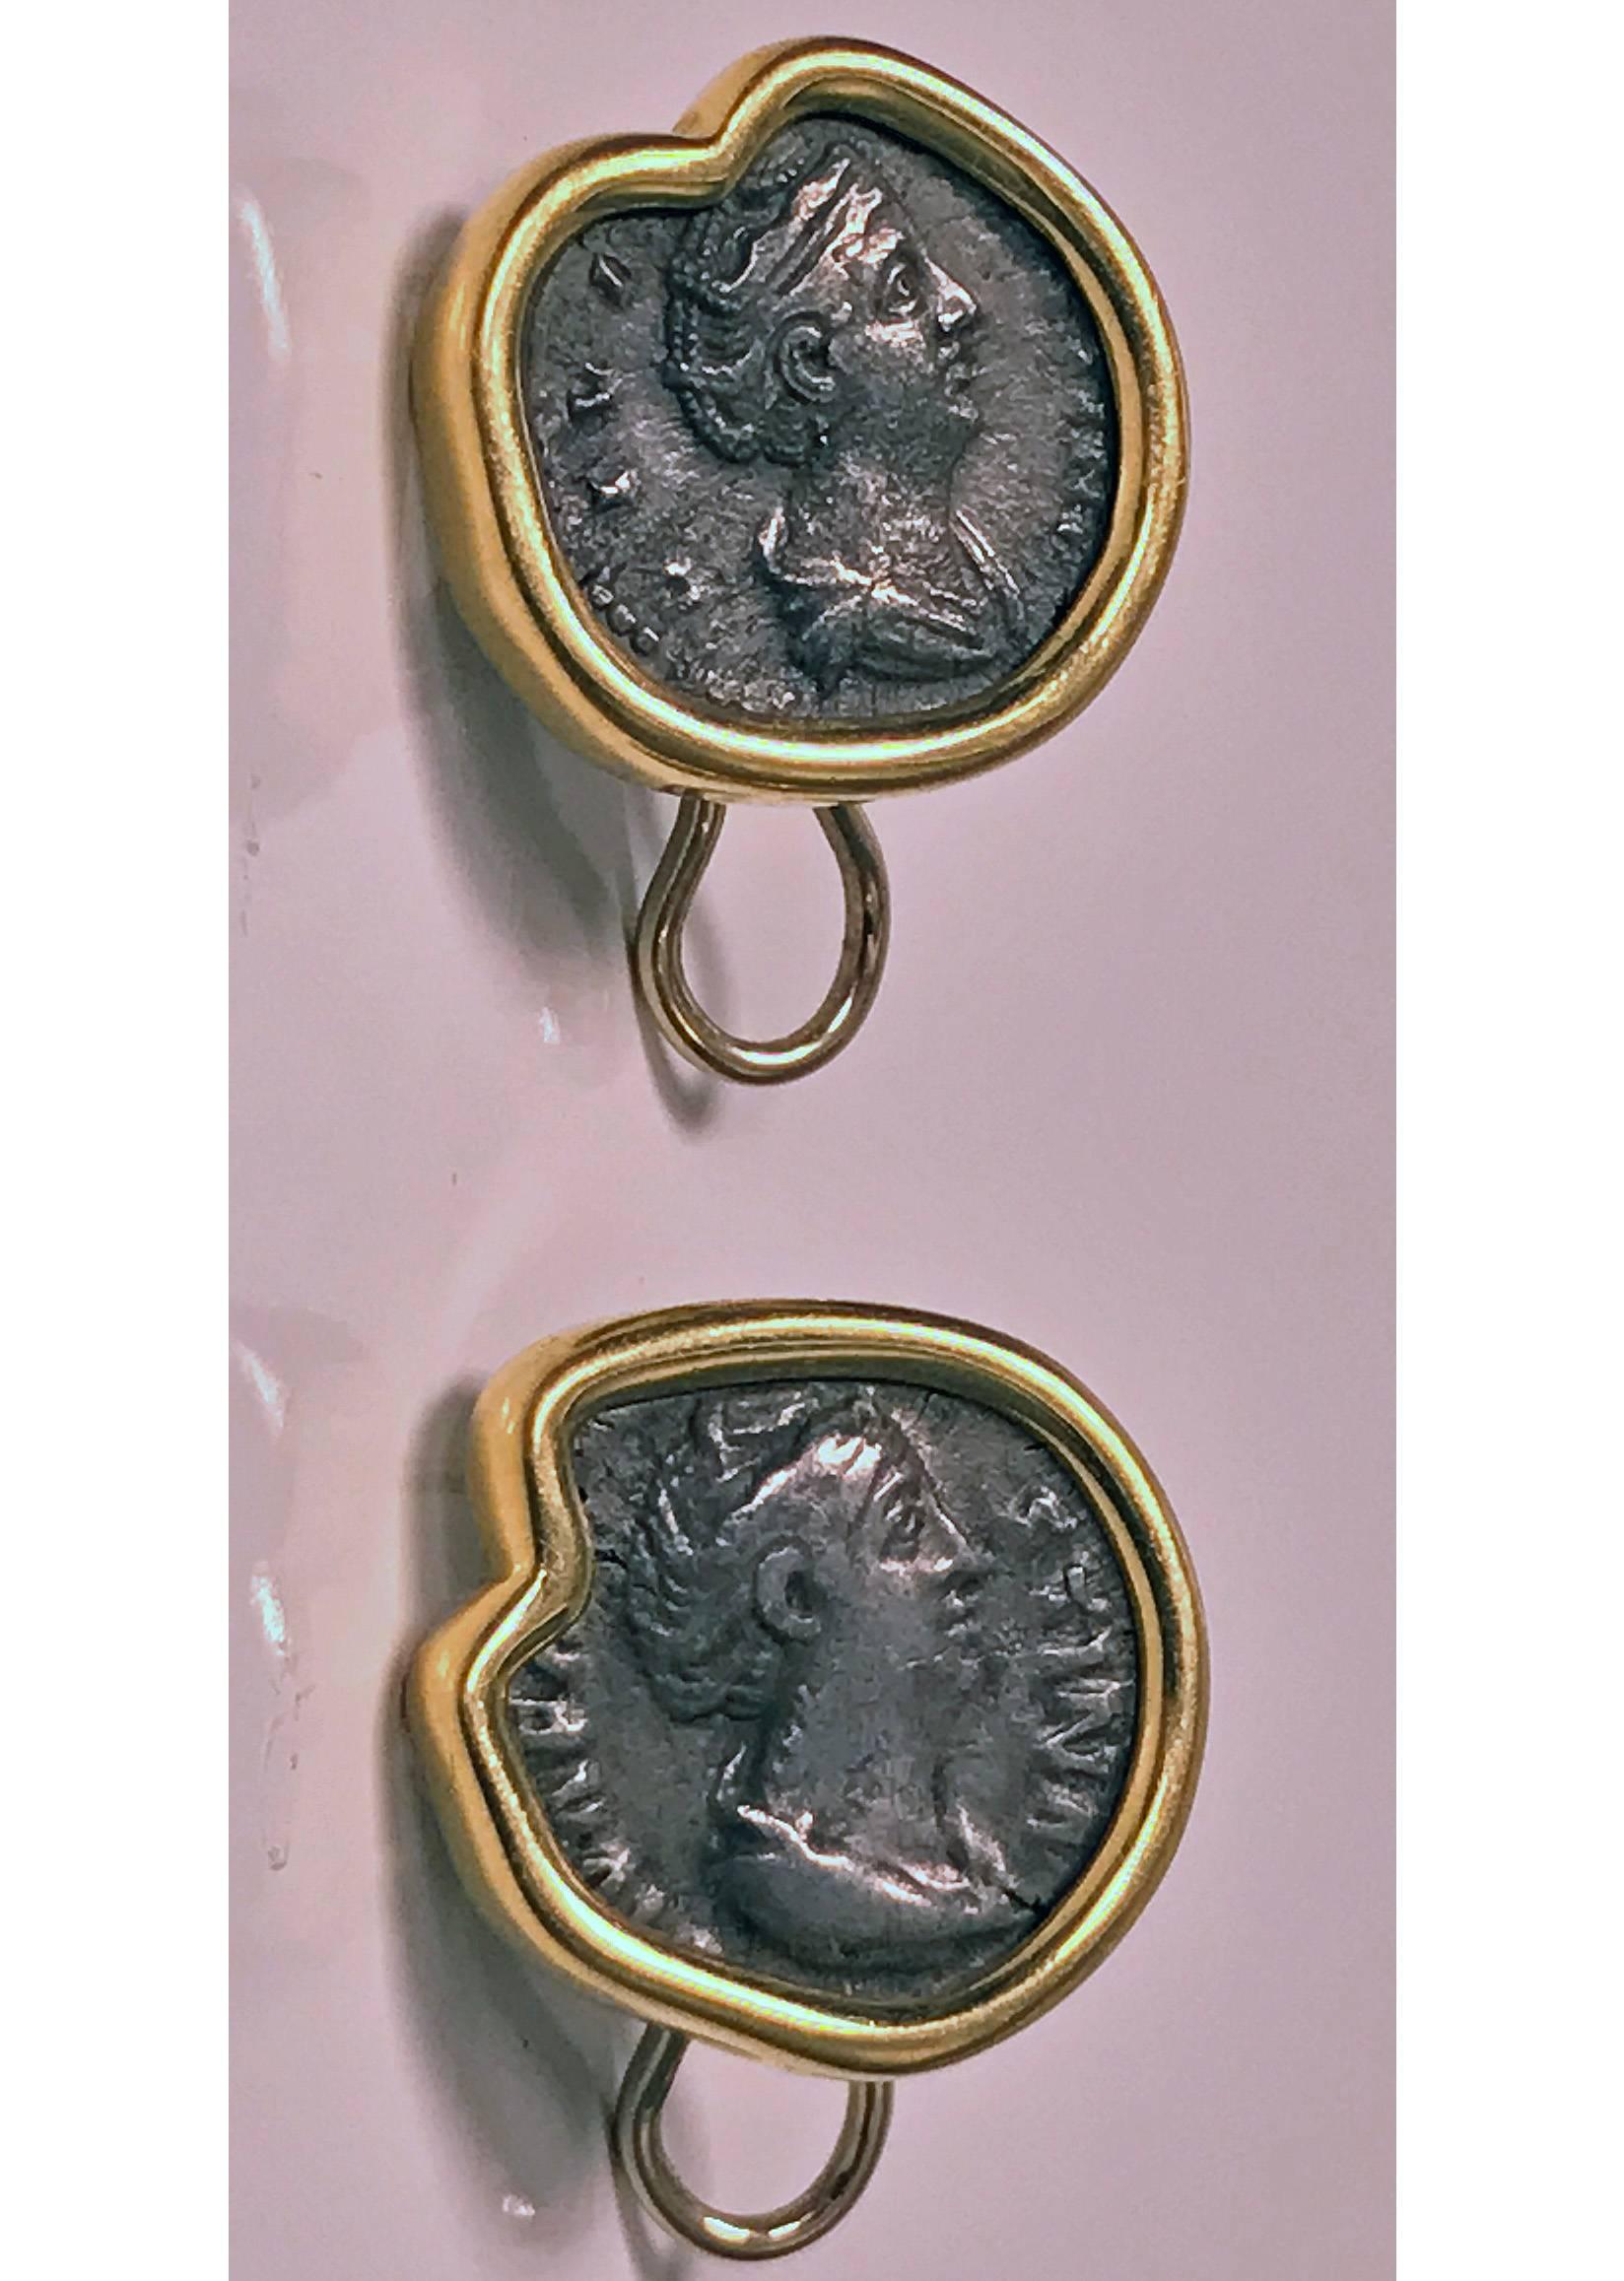 Pair of 18K custom mounted Ancient Coin Earrings, C.1990. Each earring depicting an ancient roman coin, custom mounted with yellow gold solid bezel surround, post and clip fitments stamped 750 and 1198F1 Italian marks for Il Conio Artistico